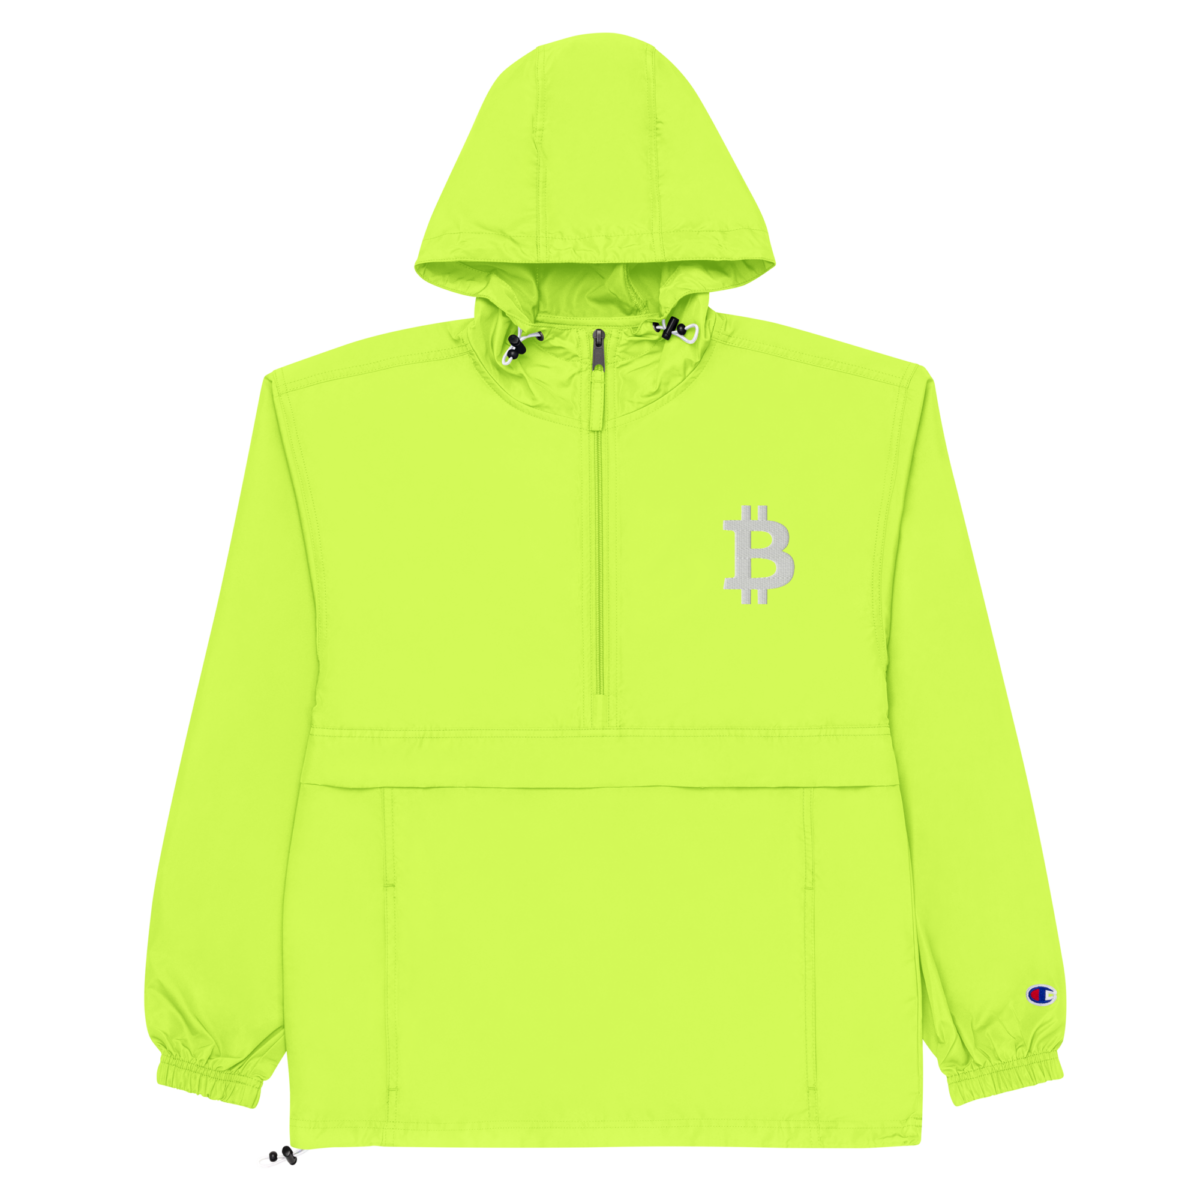 embroidered champion packable jacket safety green front 631f52b593a76 - Bitcoin Champion Packable Jacket